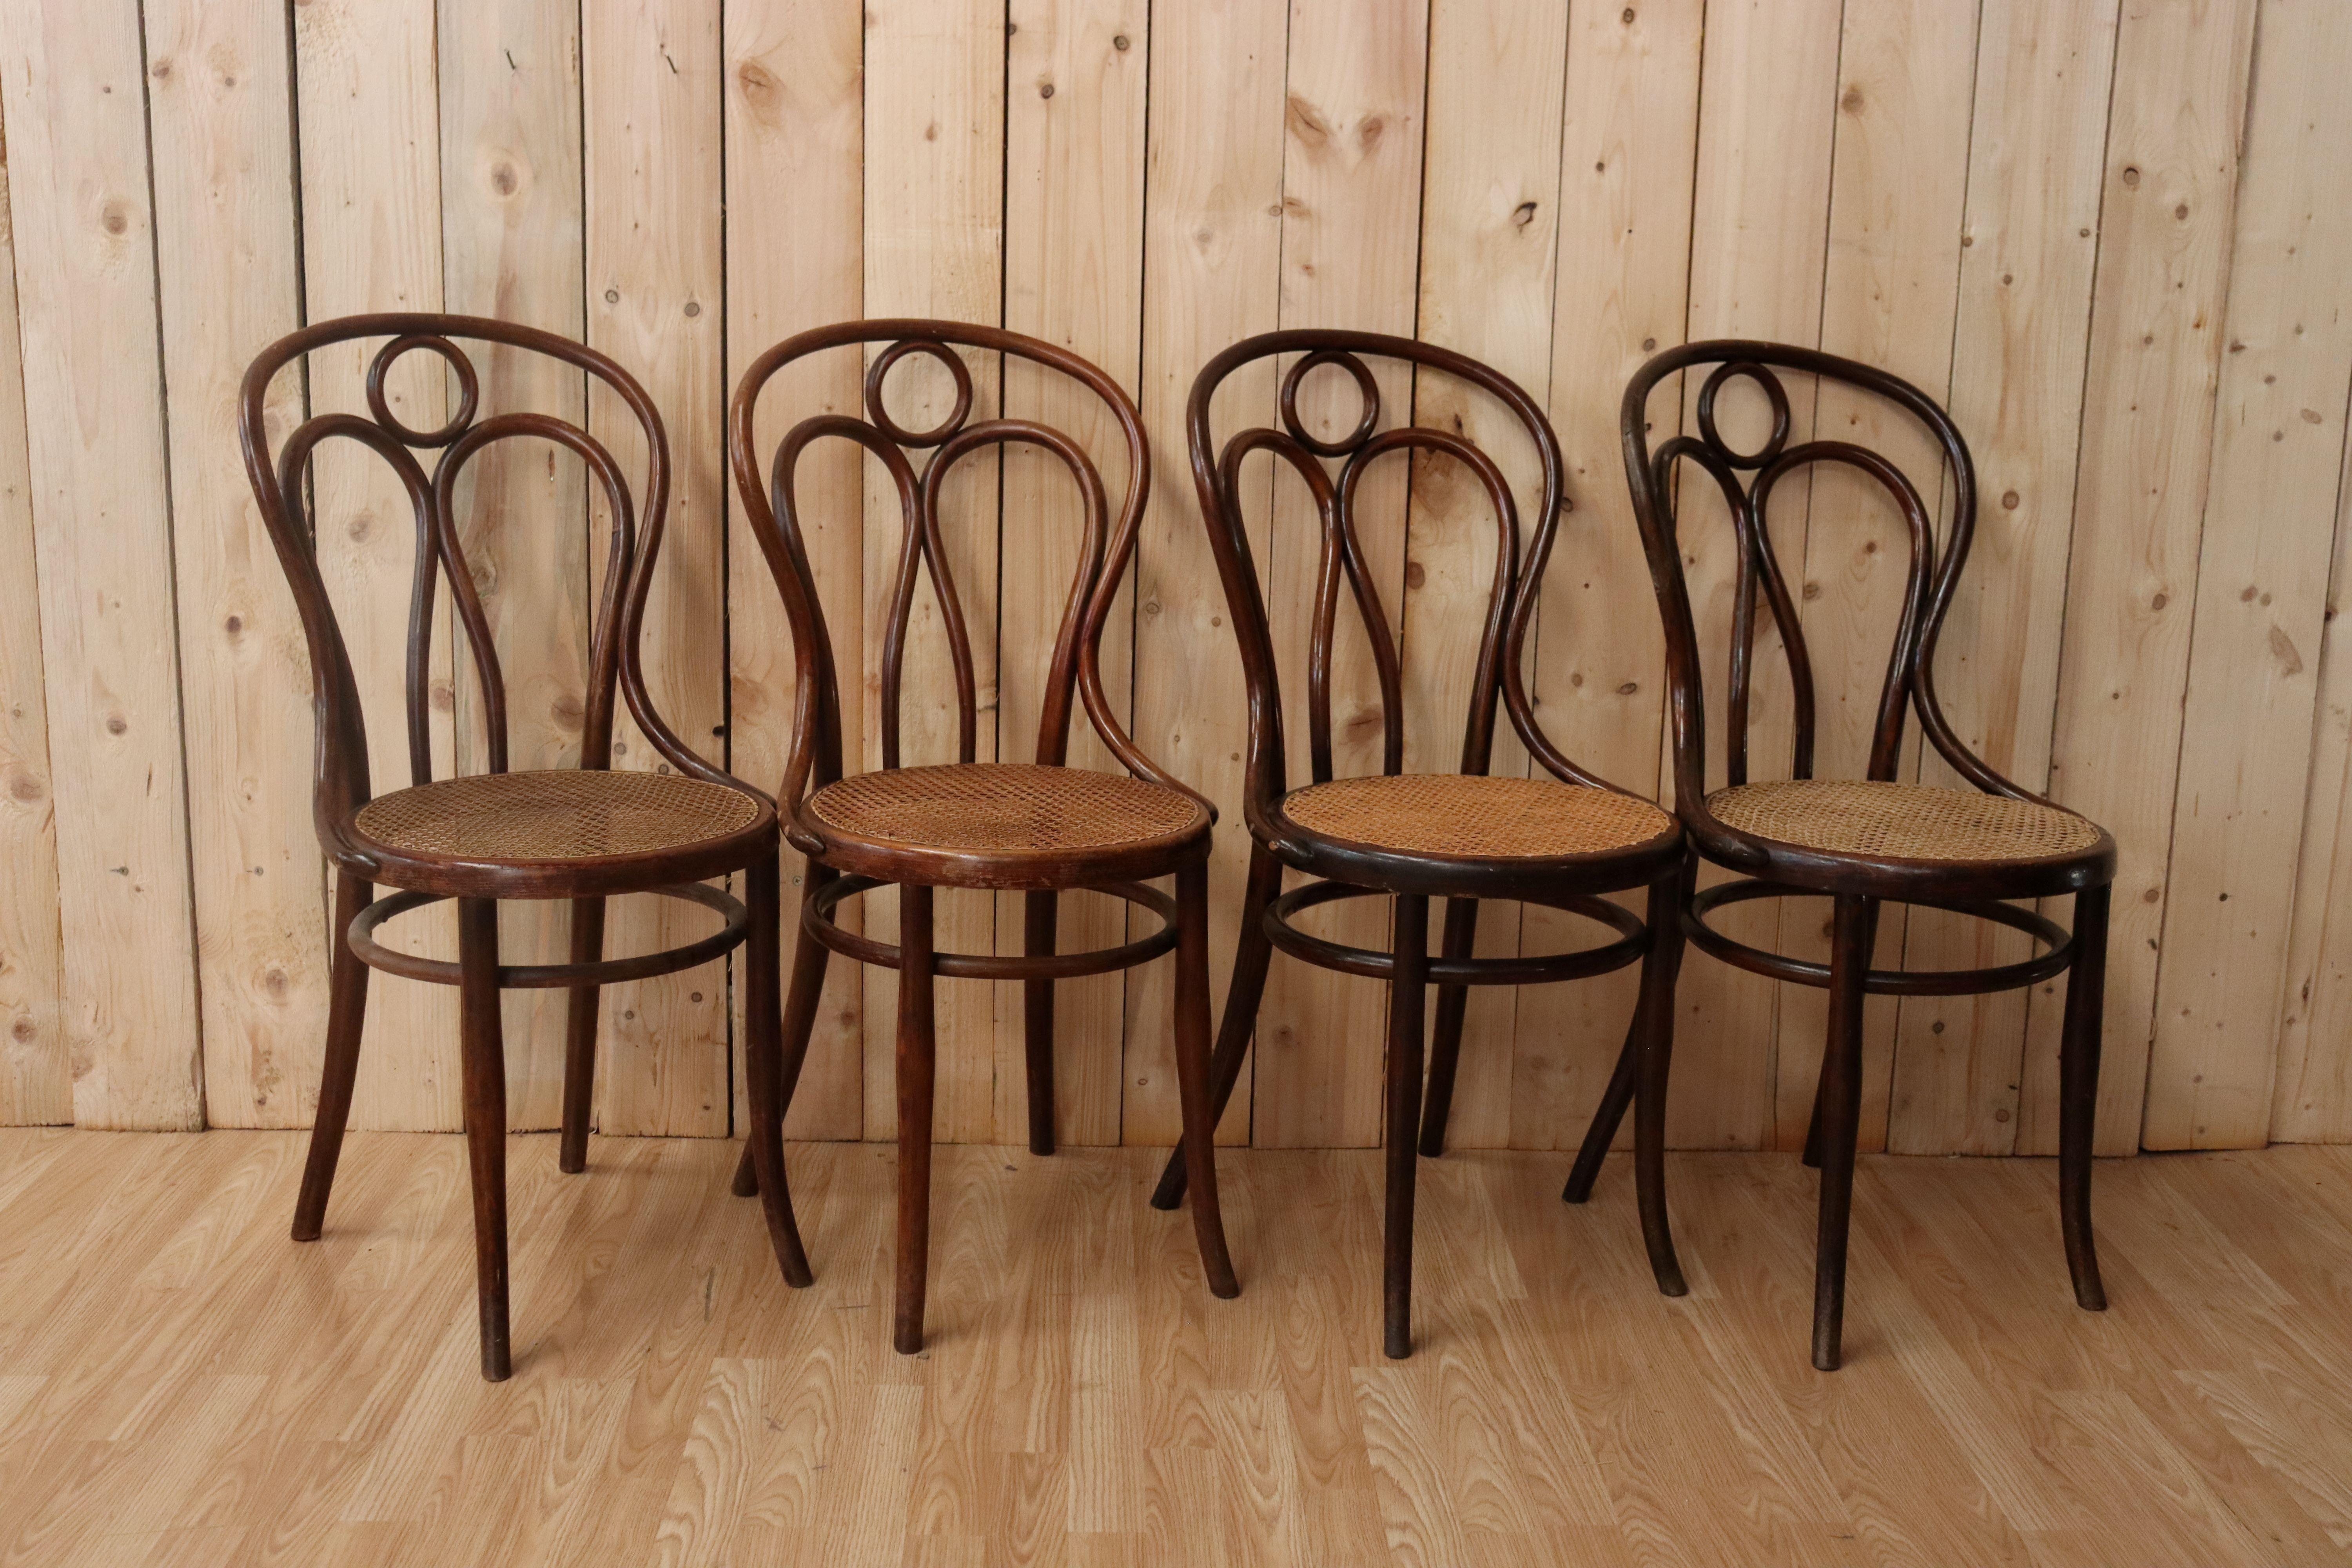 Beautiful series of 8 bistro chairs n°36 from Joseph & Jacob Kohn, period 1910. Canework seats and curved wooden structure. Excellent condition and beautiful patina of time. Presence of use. Seat height 47cm.